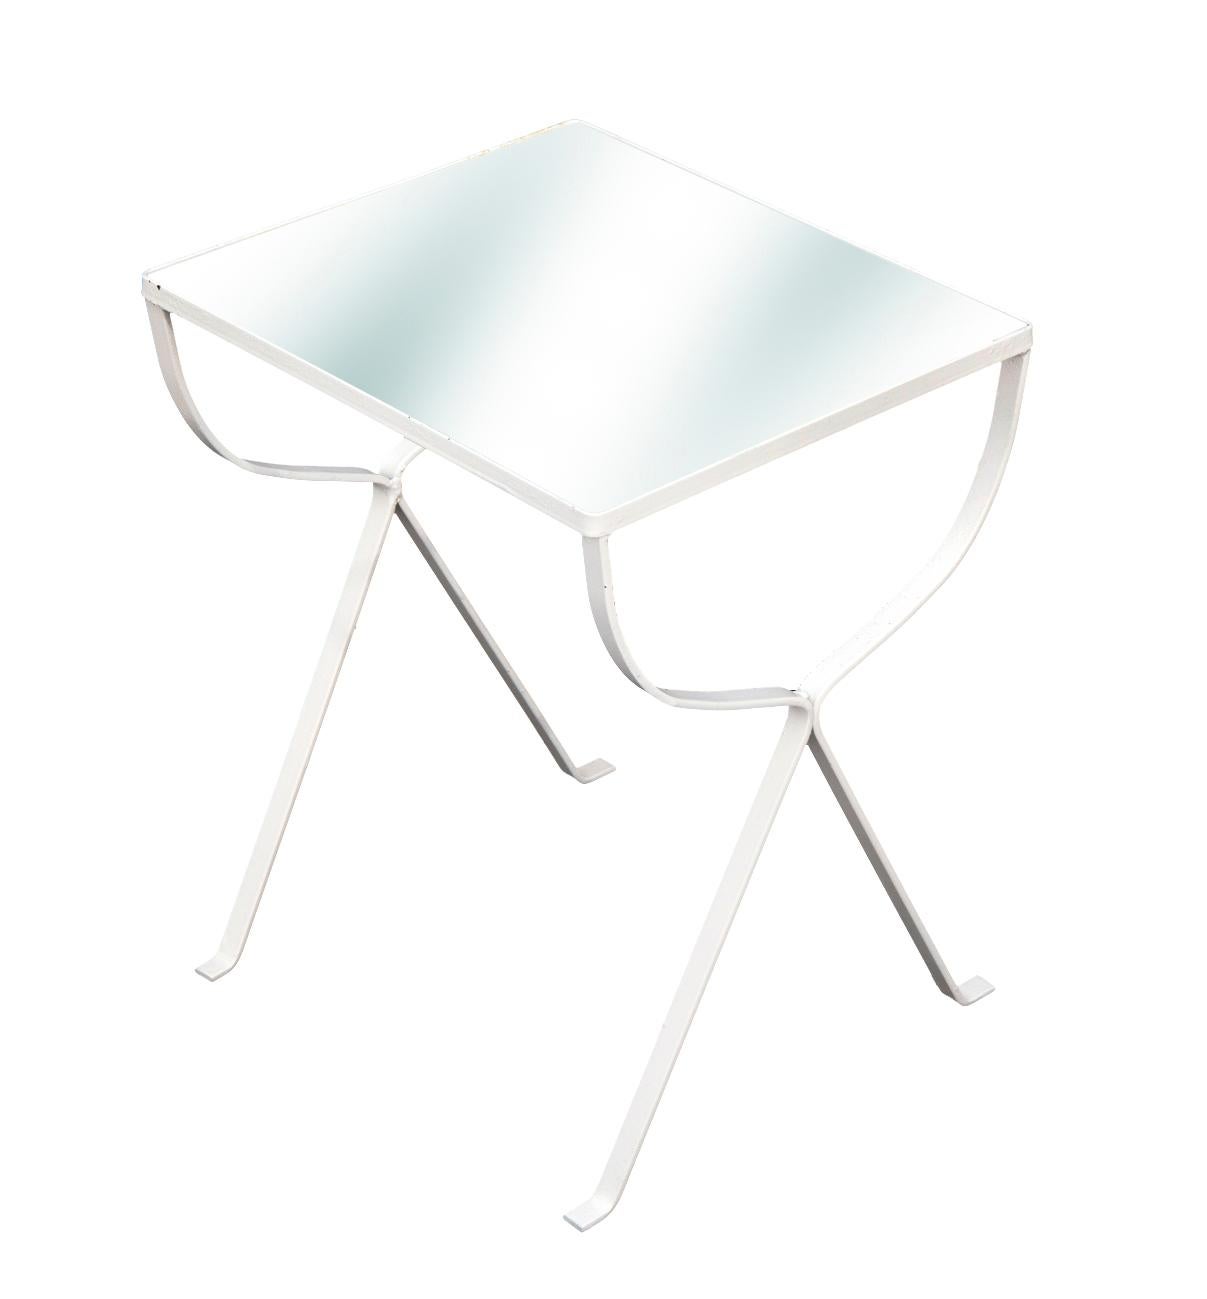 Iron Outdoor Nesting Tables Glass Top a pair In Good Condition For Sale In Malibu, CA